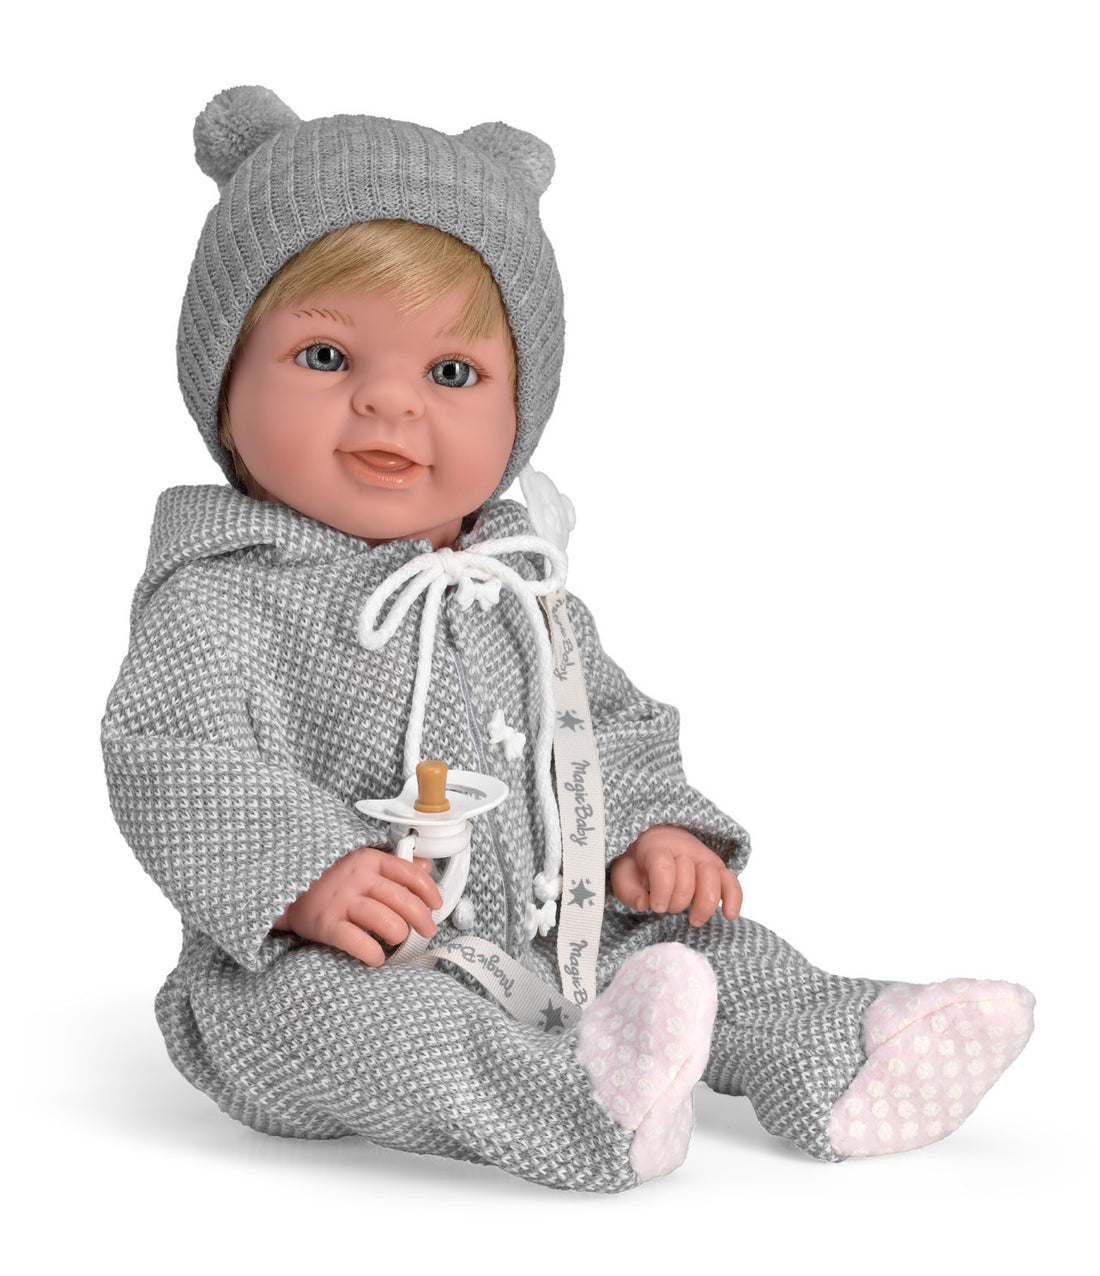 Handcrafted Paula Collection Magic Baby Doll (46514) by LAMAGIK